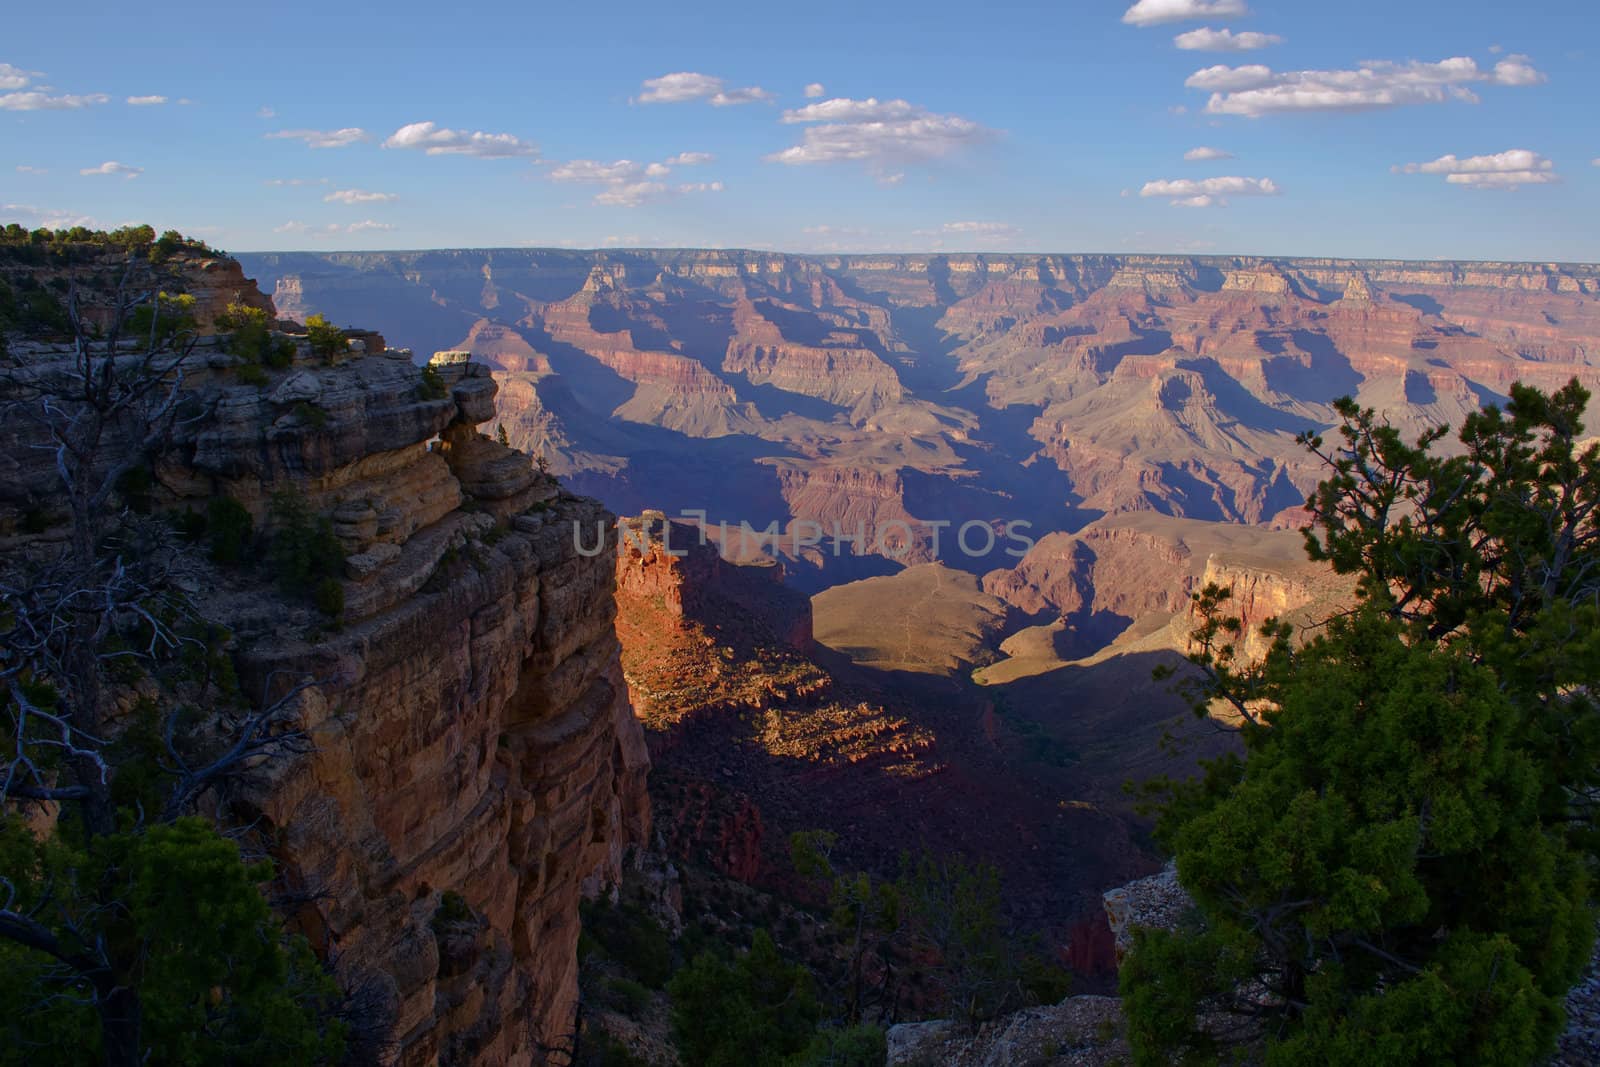 The bright sun shining against the colorful rock walls made for a majestic view from the south rim of the Grand Canyon.